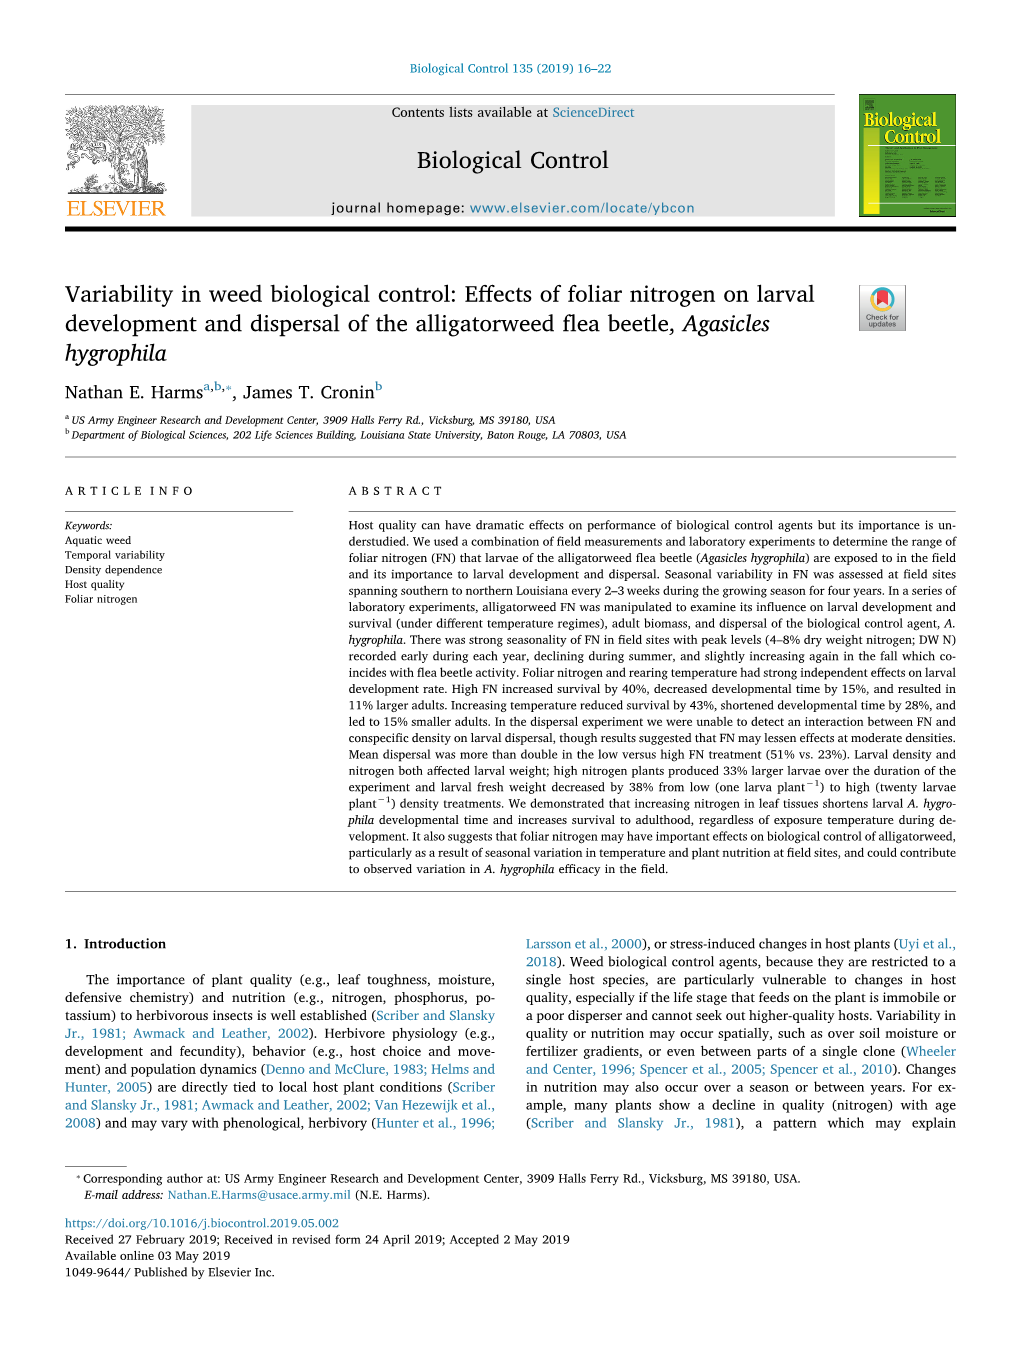 Variability in Weed Biological Control Effects of Foliar Nitrogen on Larval Development and Dispersal of the Alligatorweed Flea